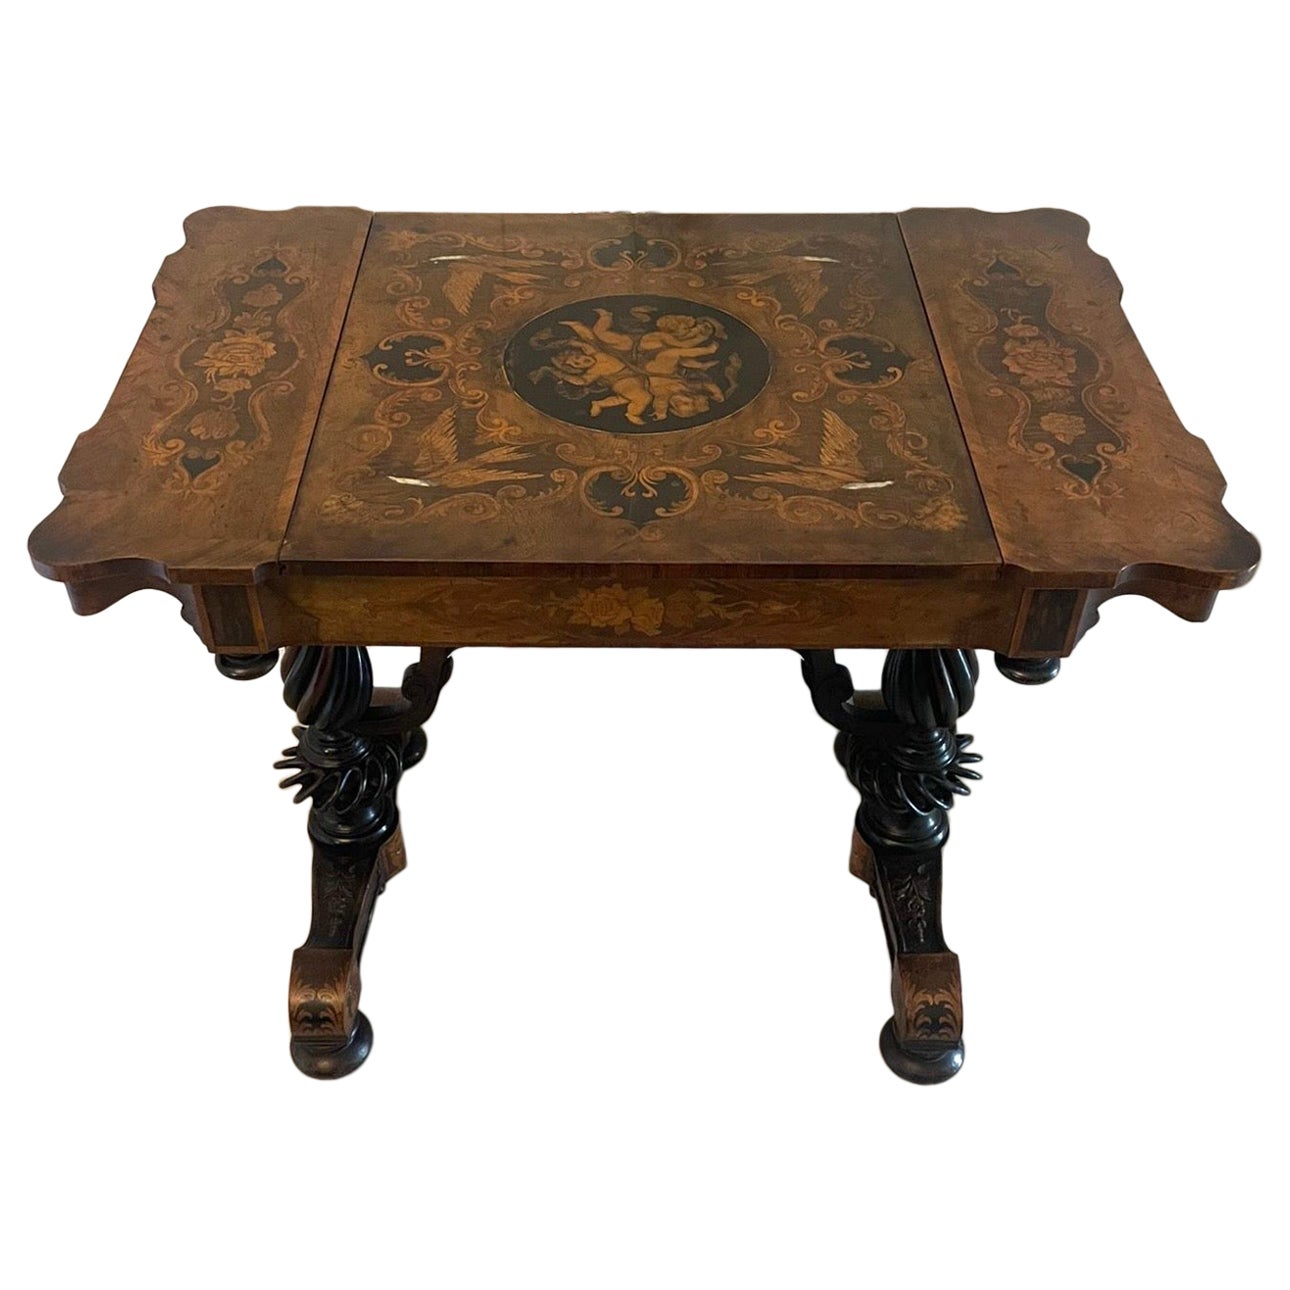 Outstanding Quality Antique Victorian Marquetry Inlaid Burr Walnut Games Table